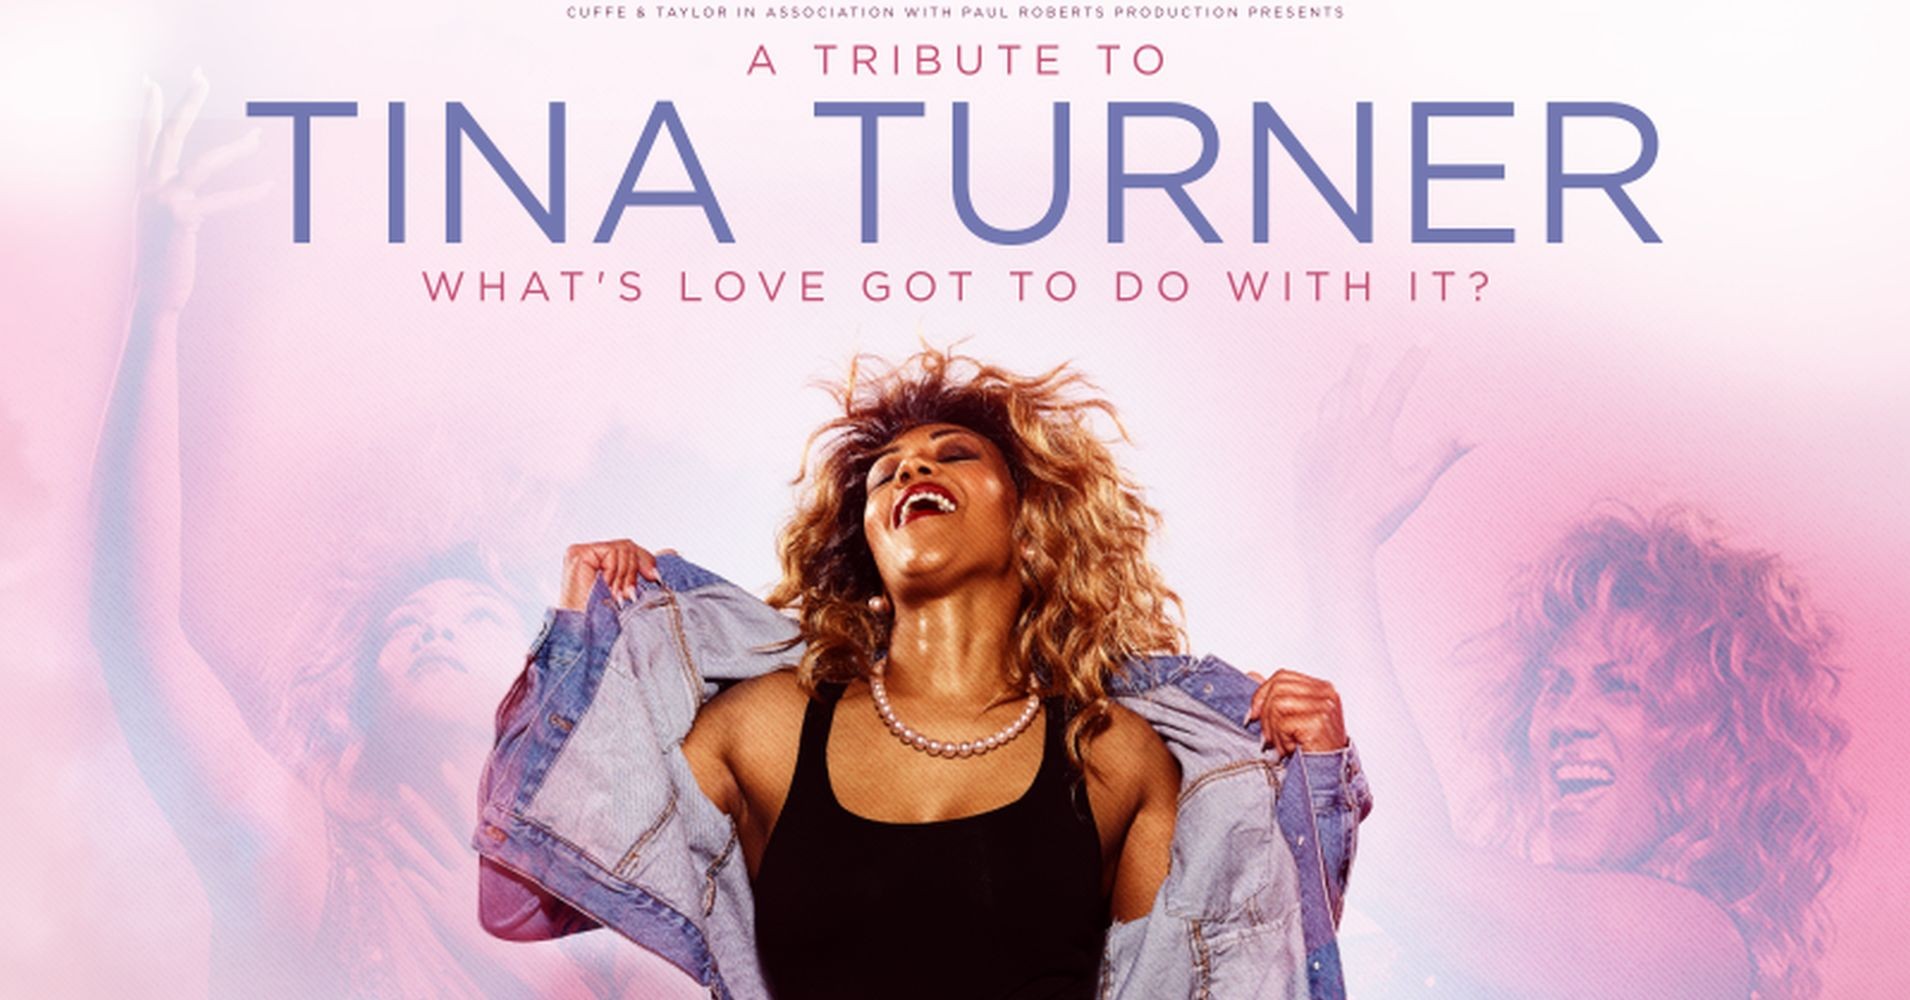 Tickets for Tribute to Tina Turner "What's Love Got To Do With It." in